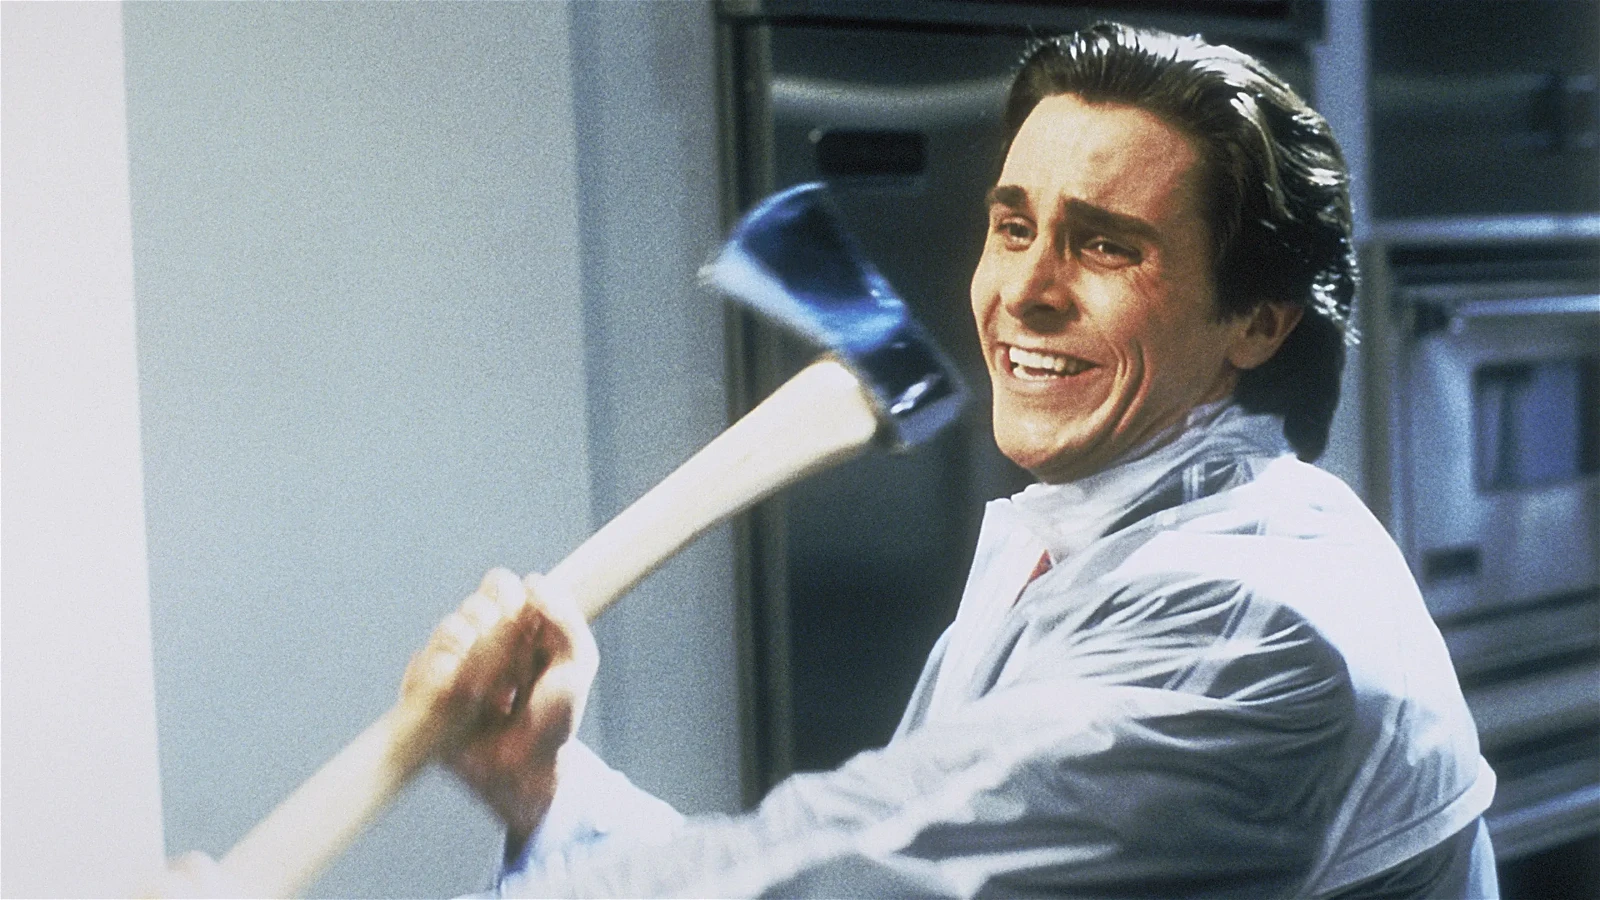 American Psycho reboot should change two major arcs from the original Christian Bale film